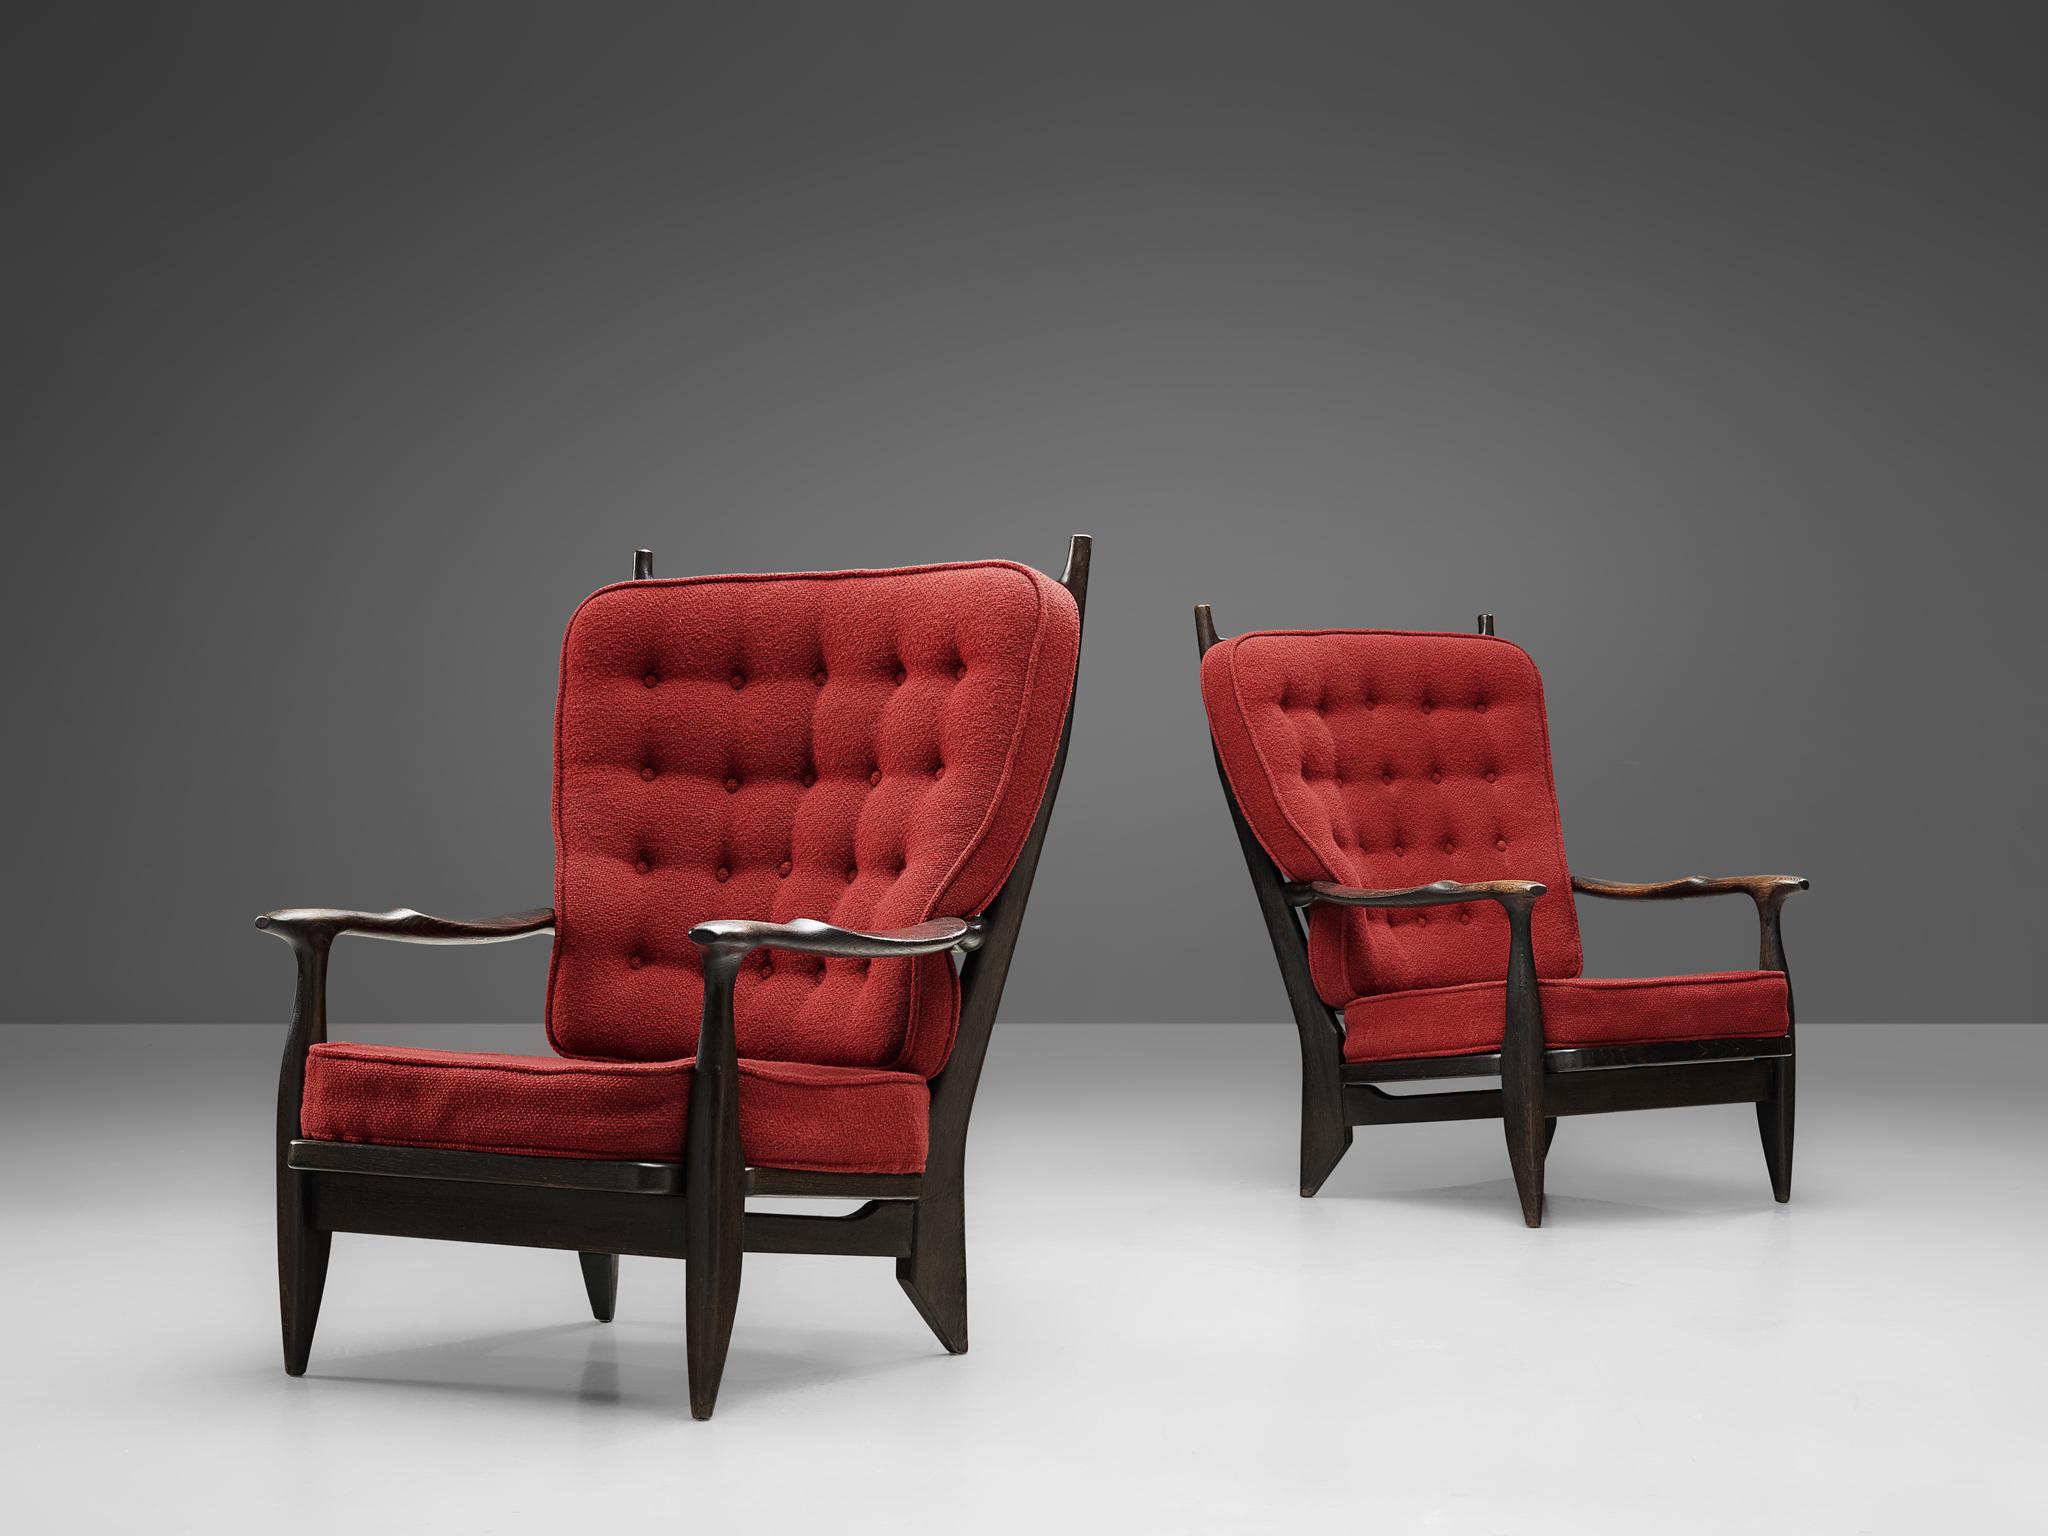 Guillerme et Chambron, lounge chairs, oak, red upholstery, darkened oak, France, 1960s.

Guillerme and Chambron are known for their high quality solid oak furniture, of which these two lounge chairs are another great example. These chairs have an